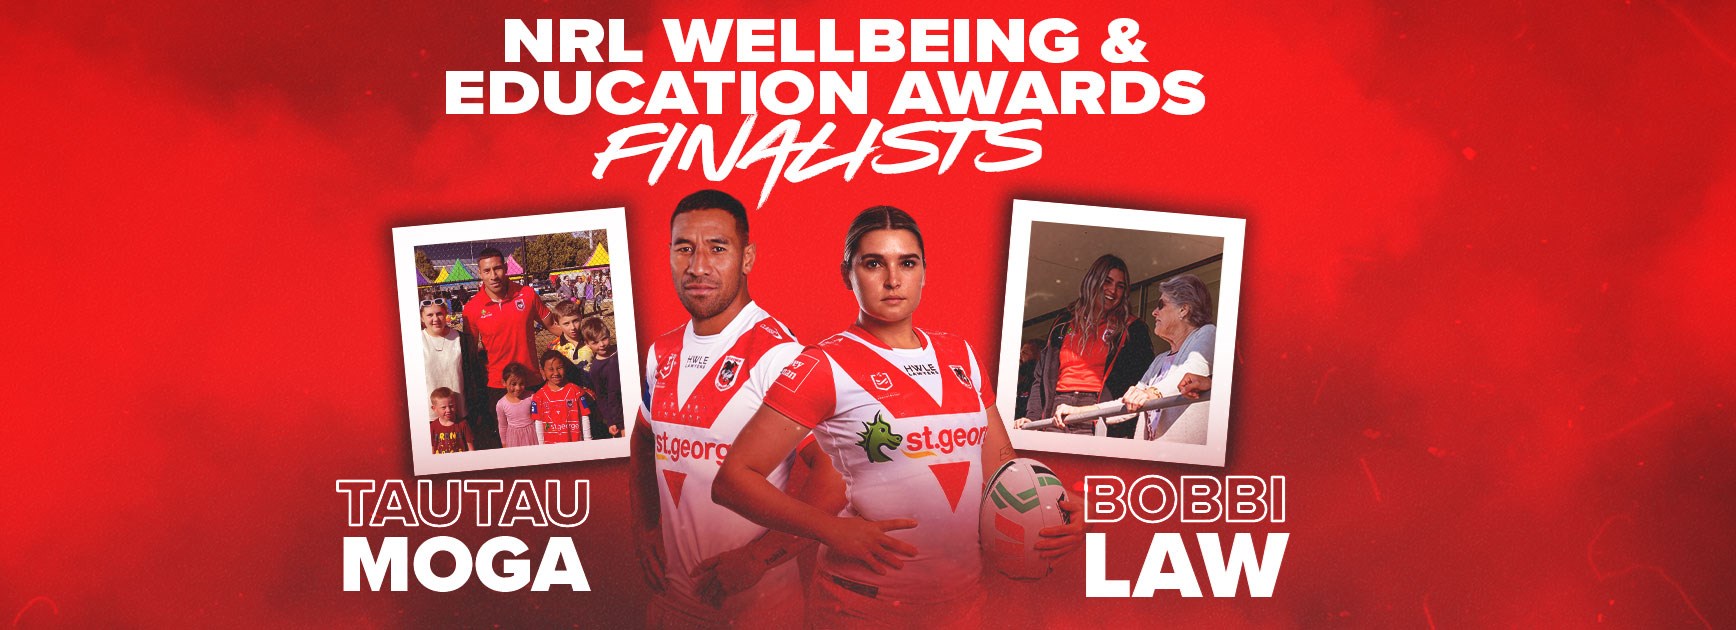 Moga, Law named finalists for 2023 NRL Wellbeing & Education Awards